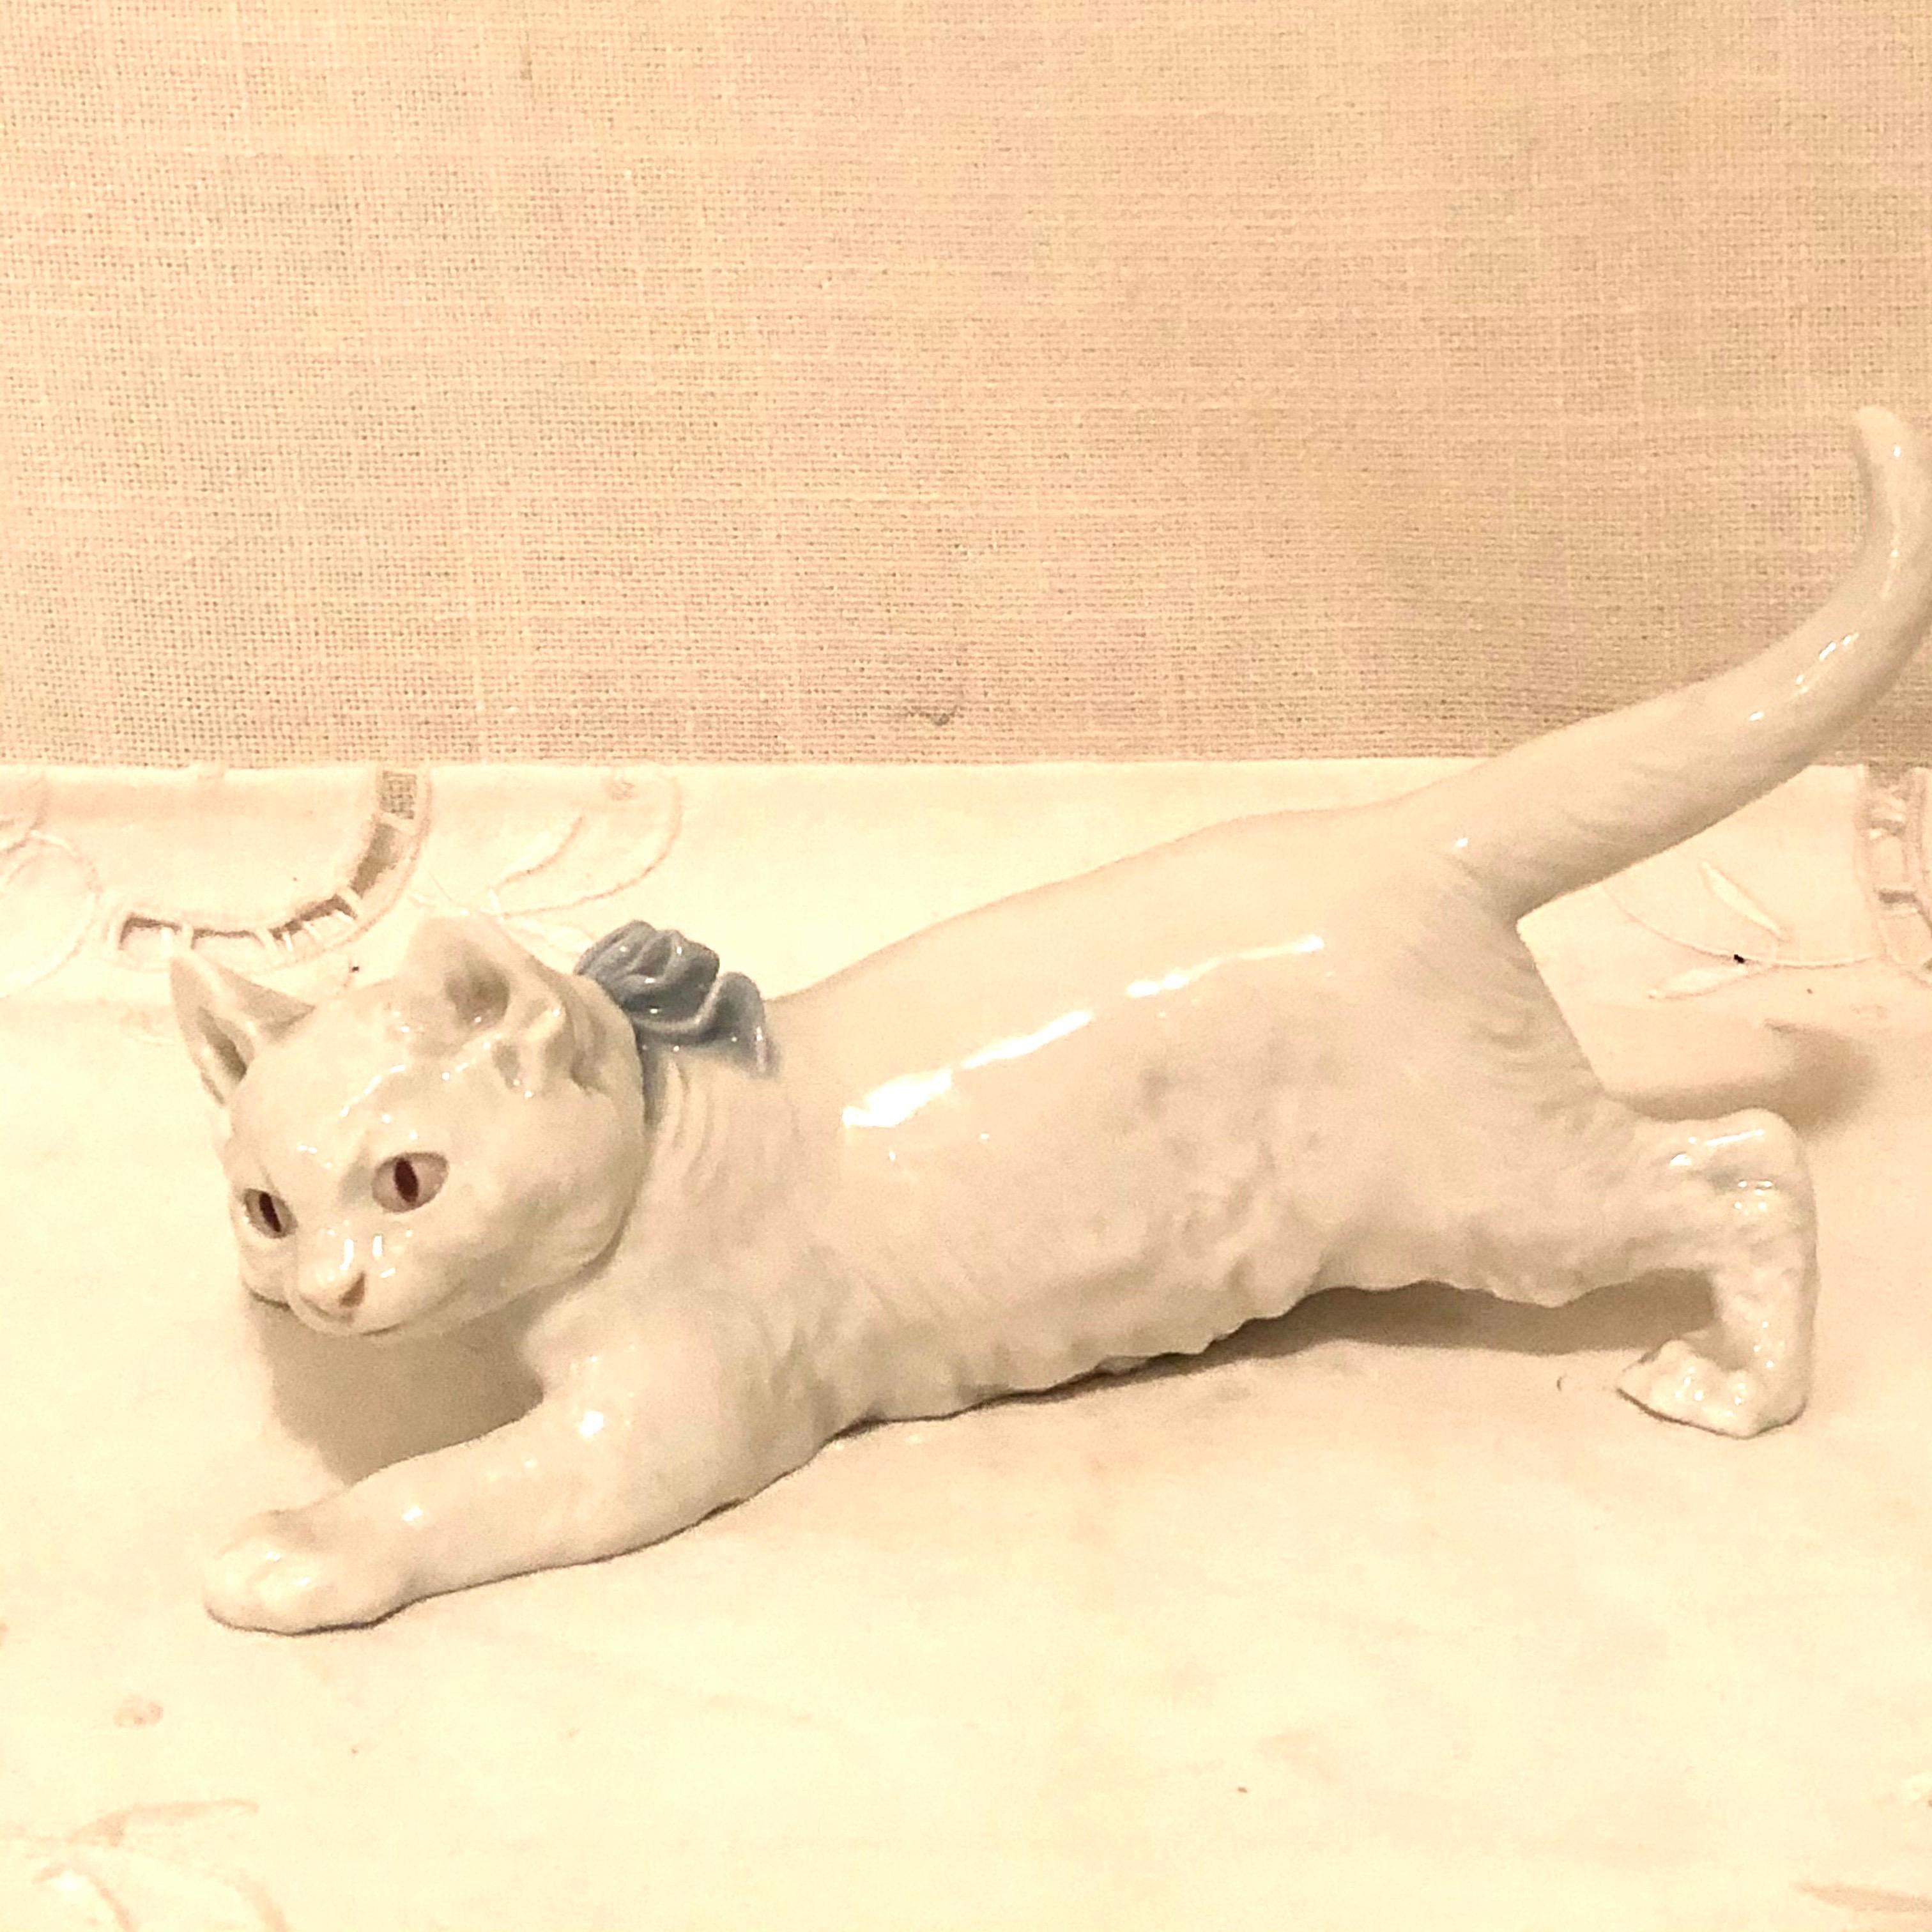 Porcelain Charming Meissen Figure of a Finely Modeled White Cat with a Blue Bow